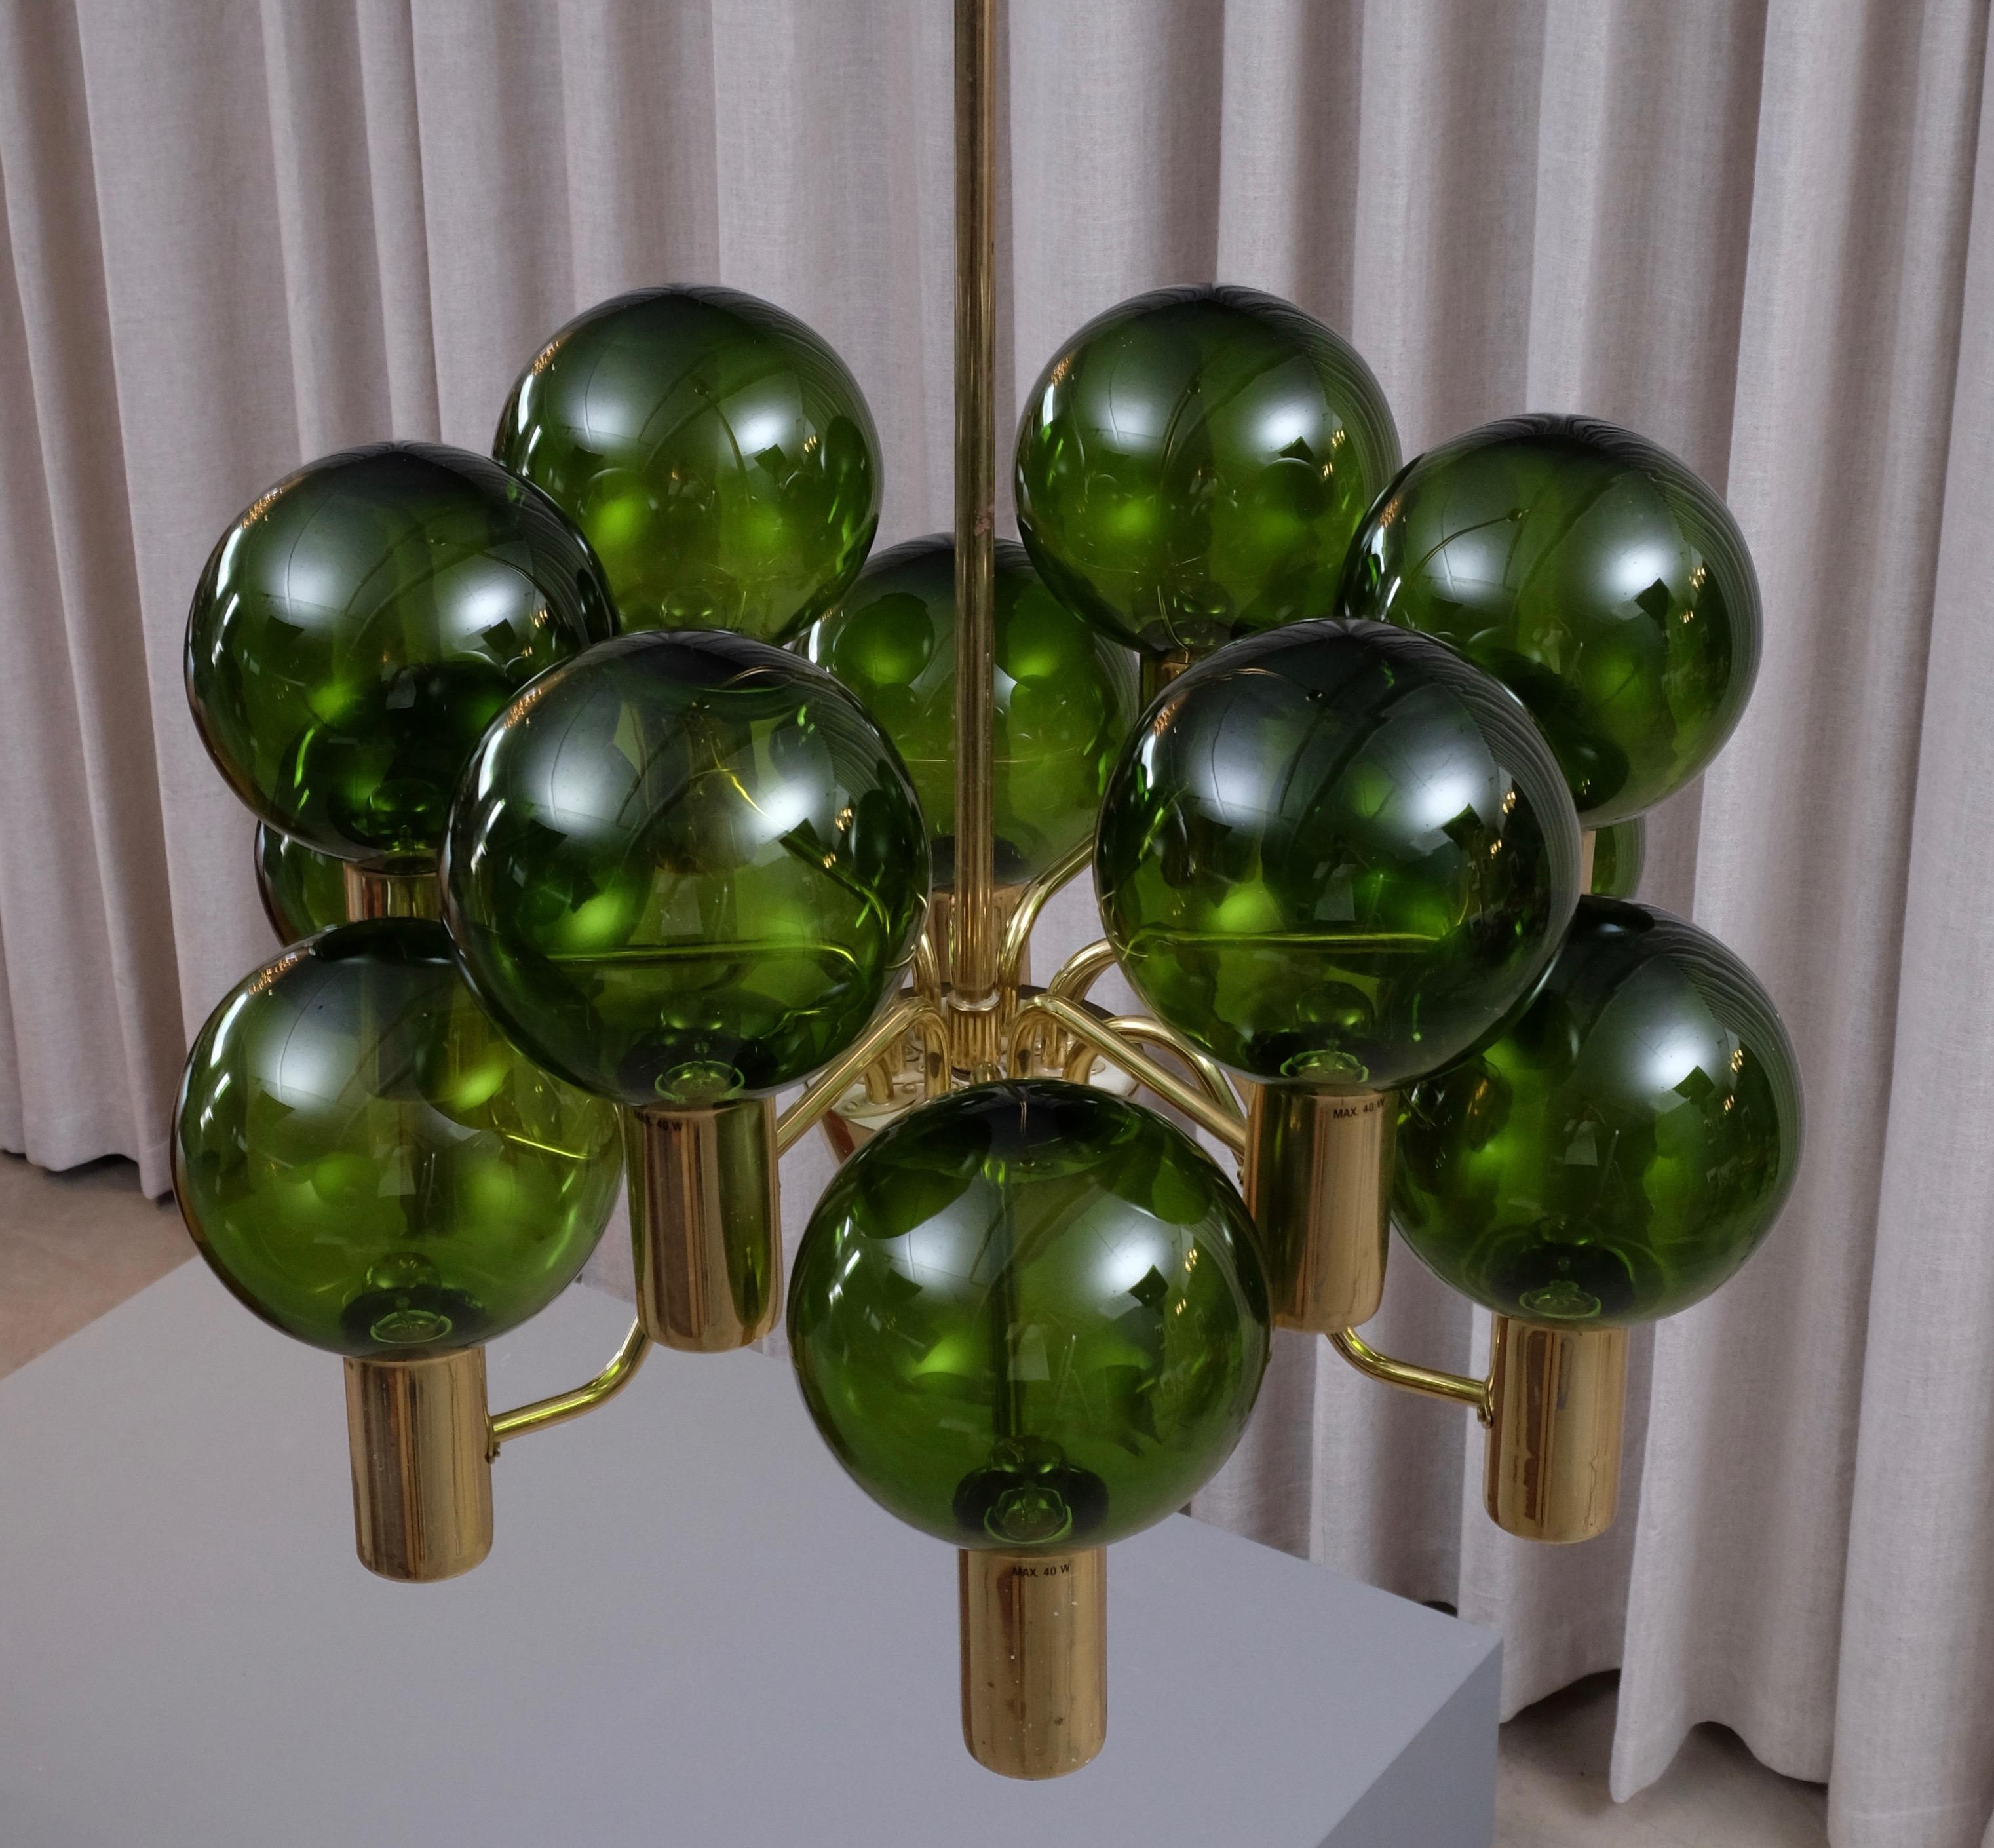 Scandinavian Modern Rare Pair of Hans-Agne Jakobsson Chandeliers T372/12 Patricia, 1960s For Sale